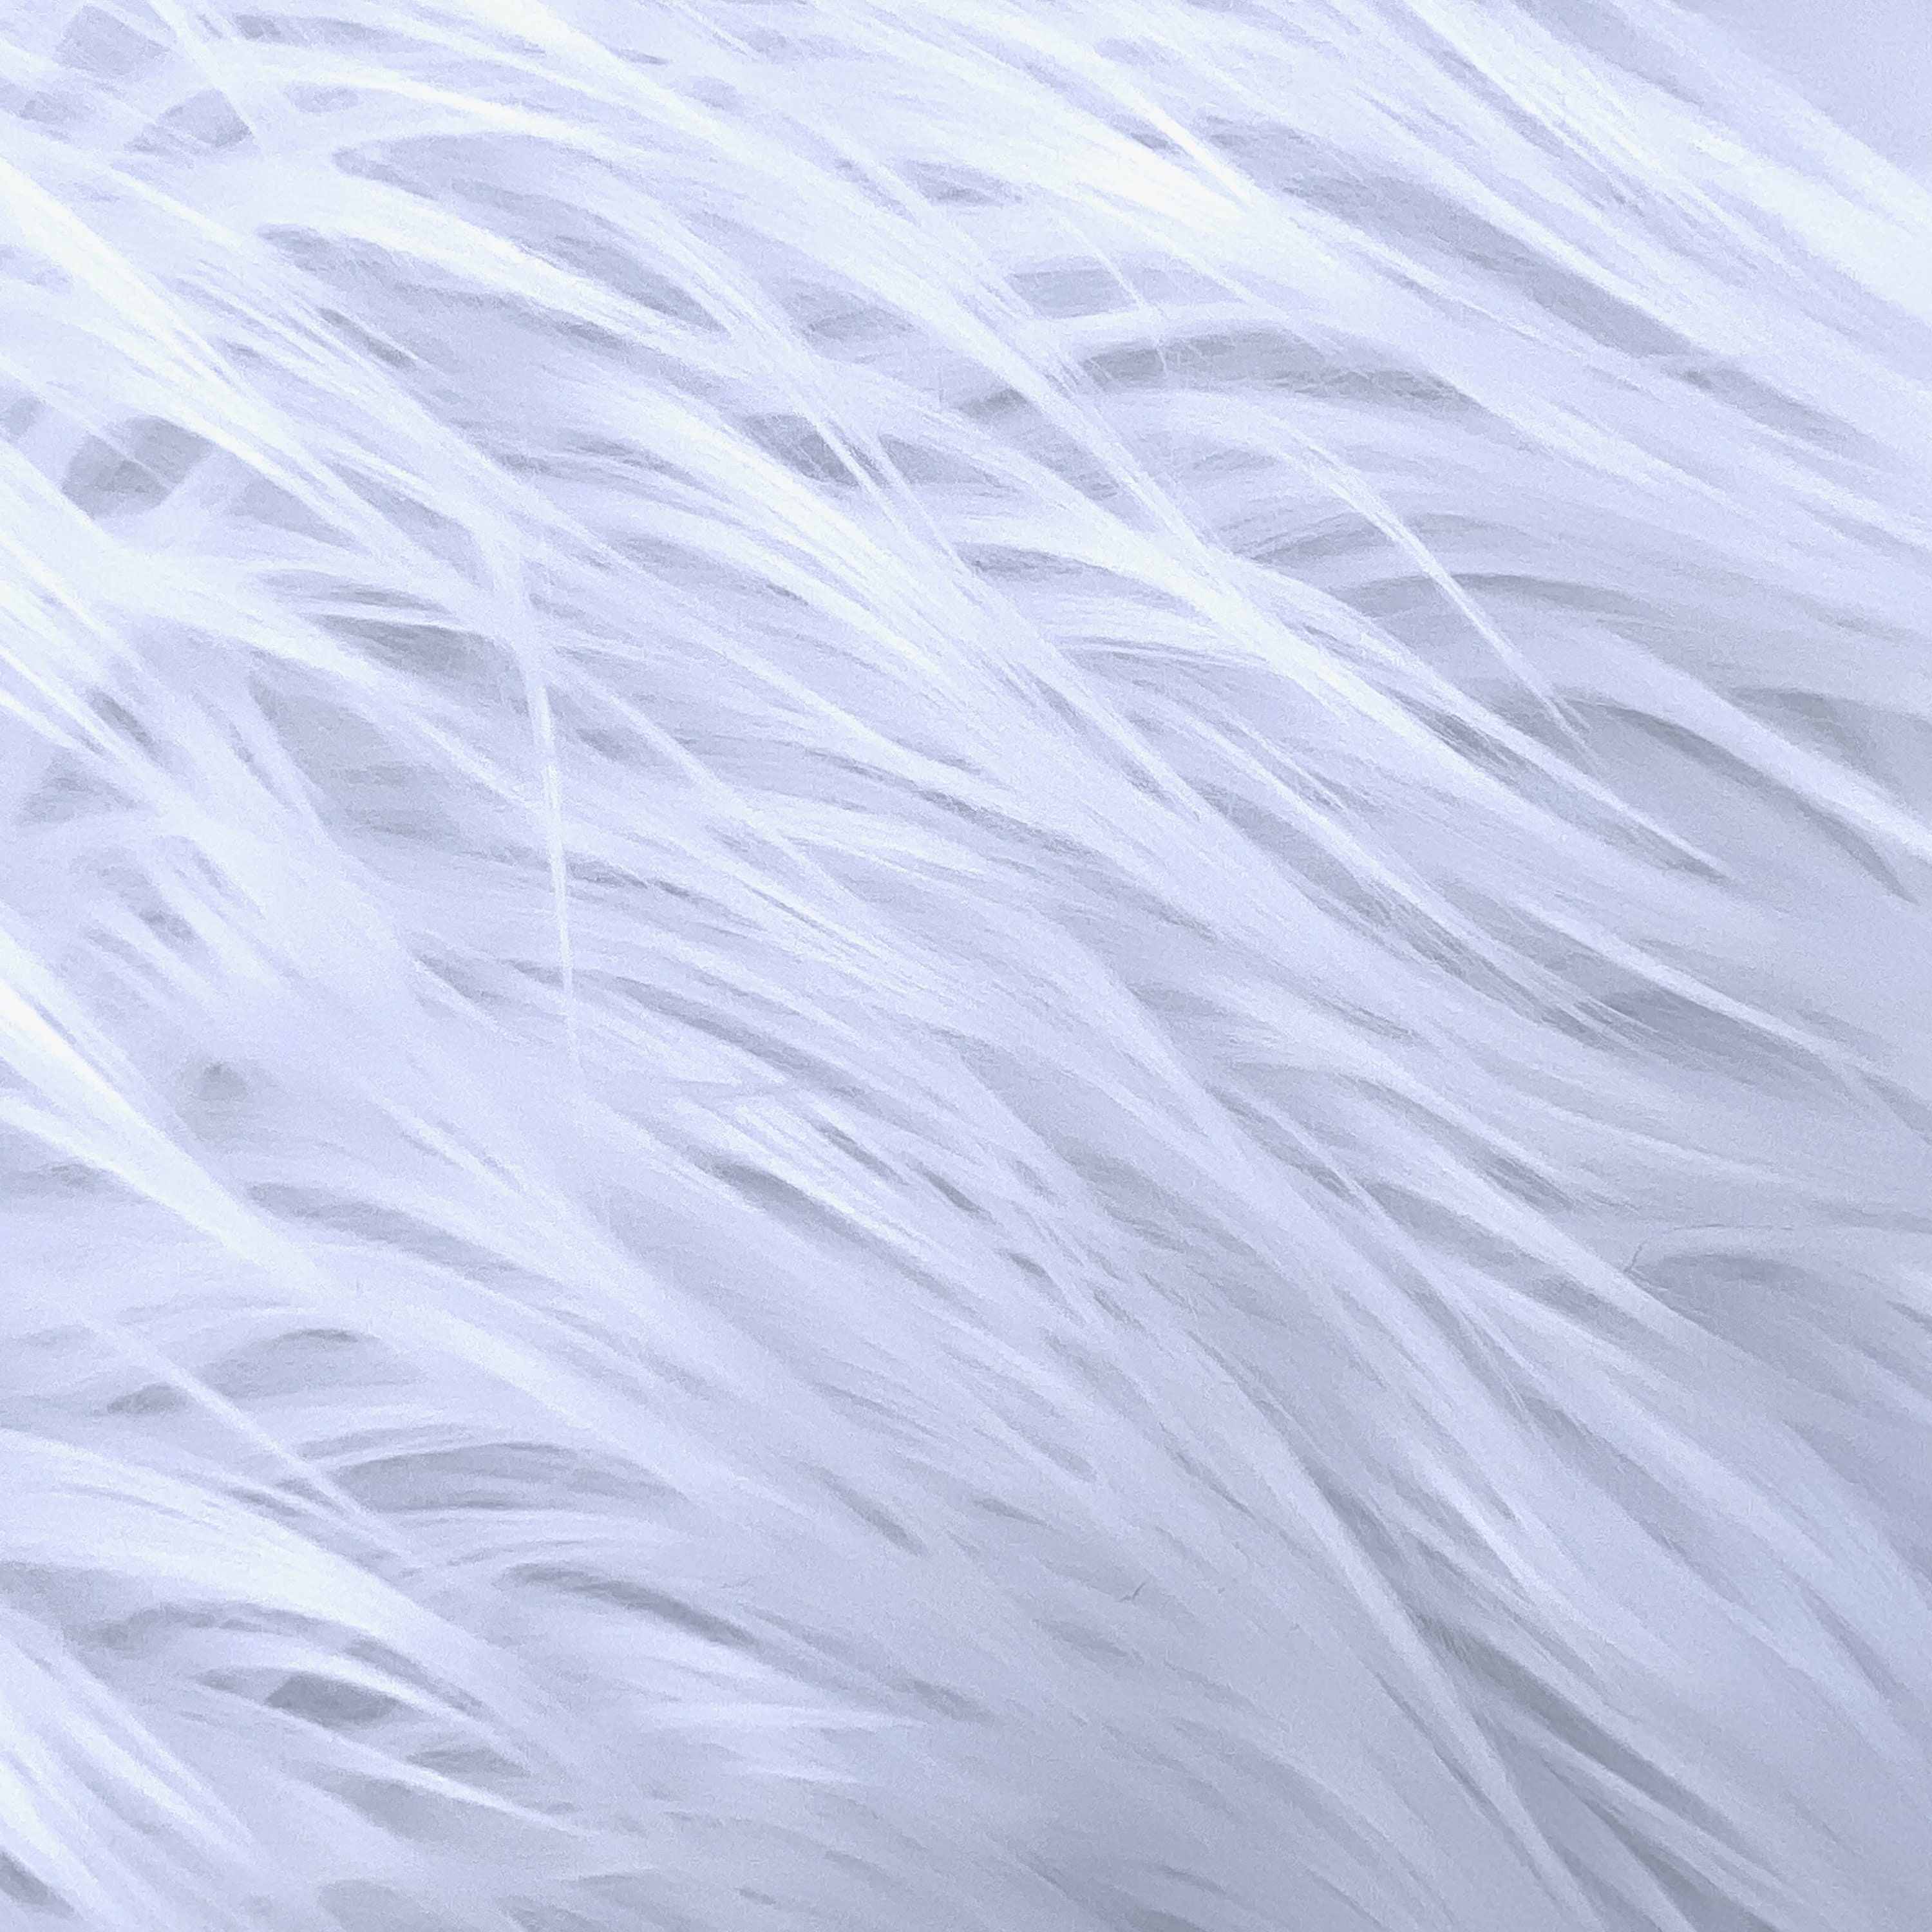 Anika WHITE Soft 4 Long Pile Faux Fur Fabric for Fursuit, Cosplay